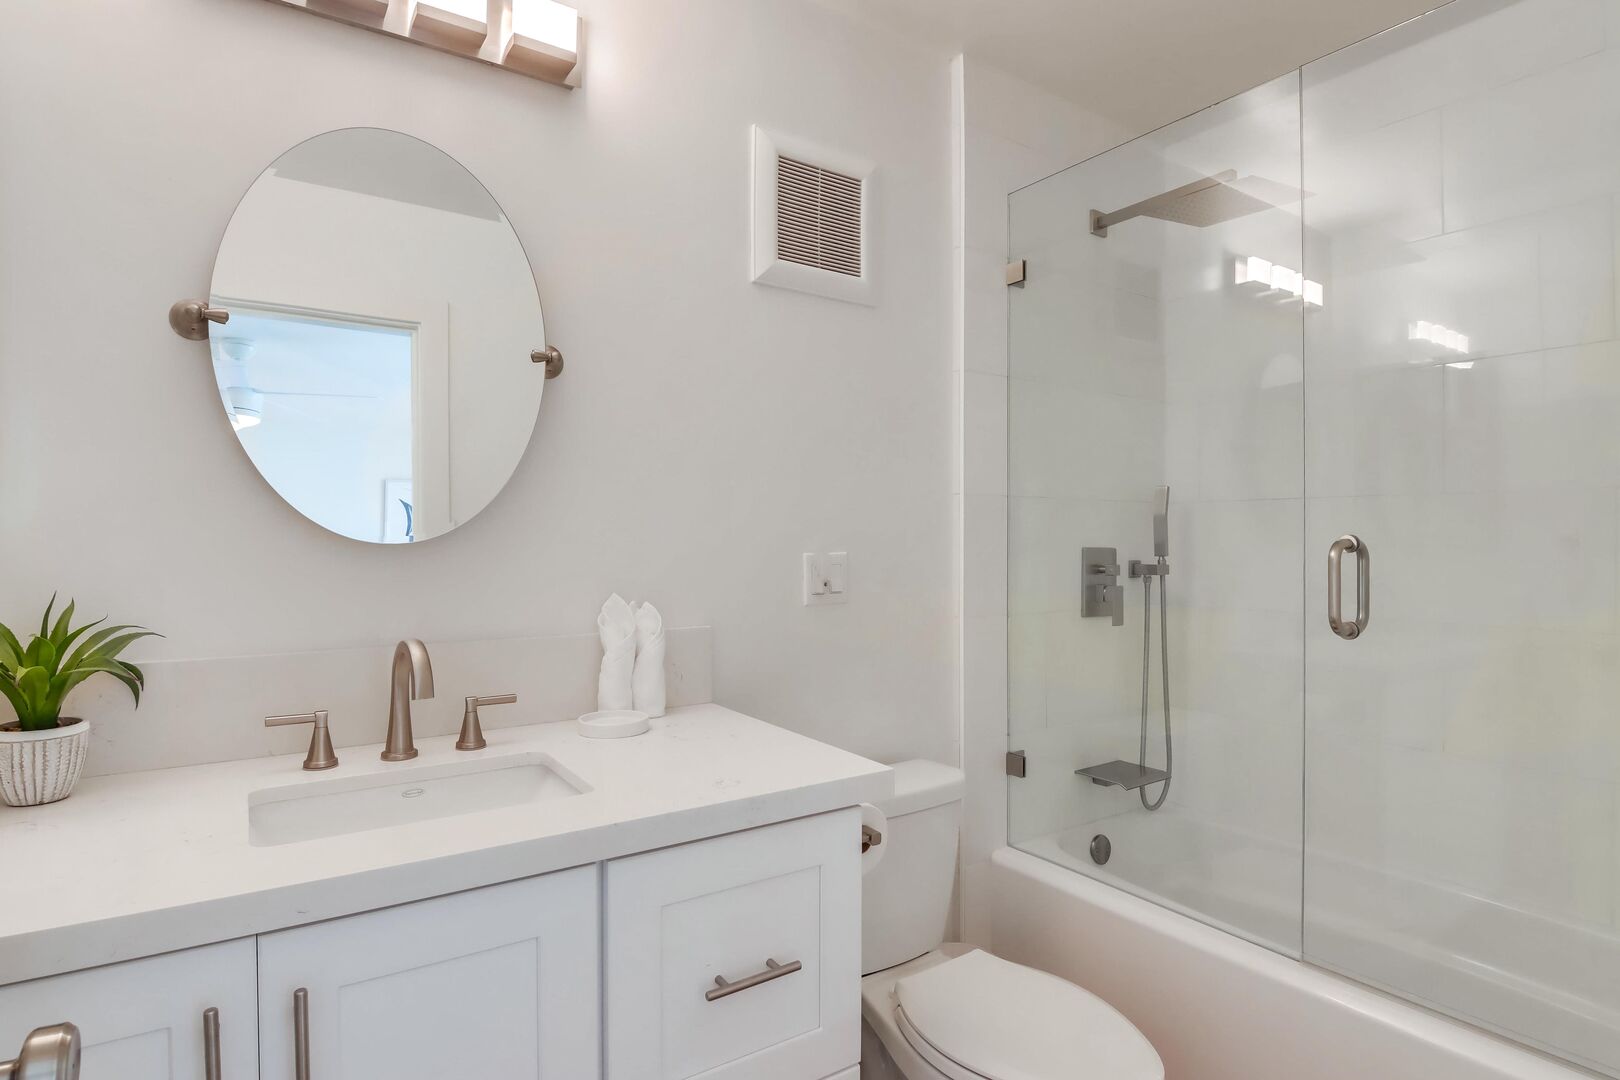 Guest in-suite bathroom completely remodeled!